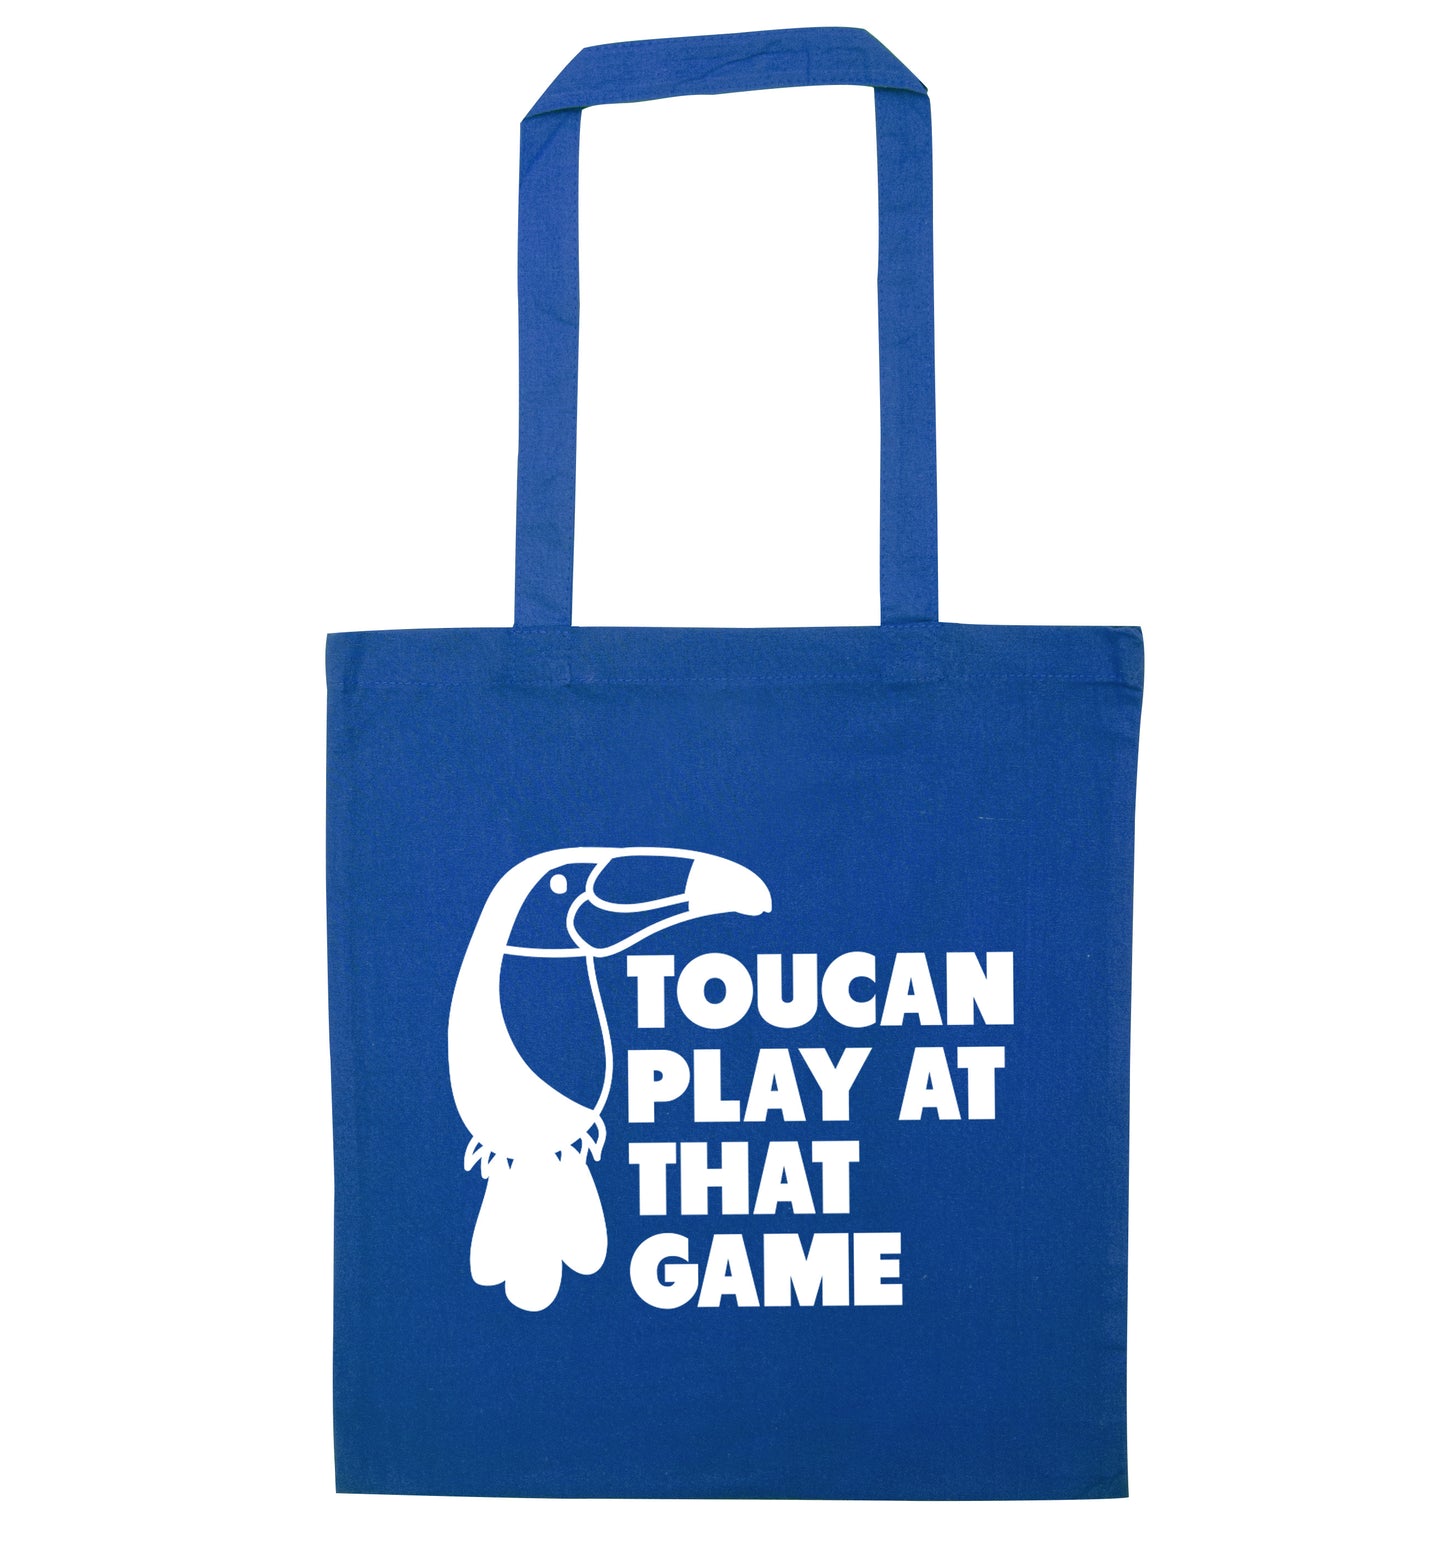 Toucan play at that game blue tote bag